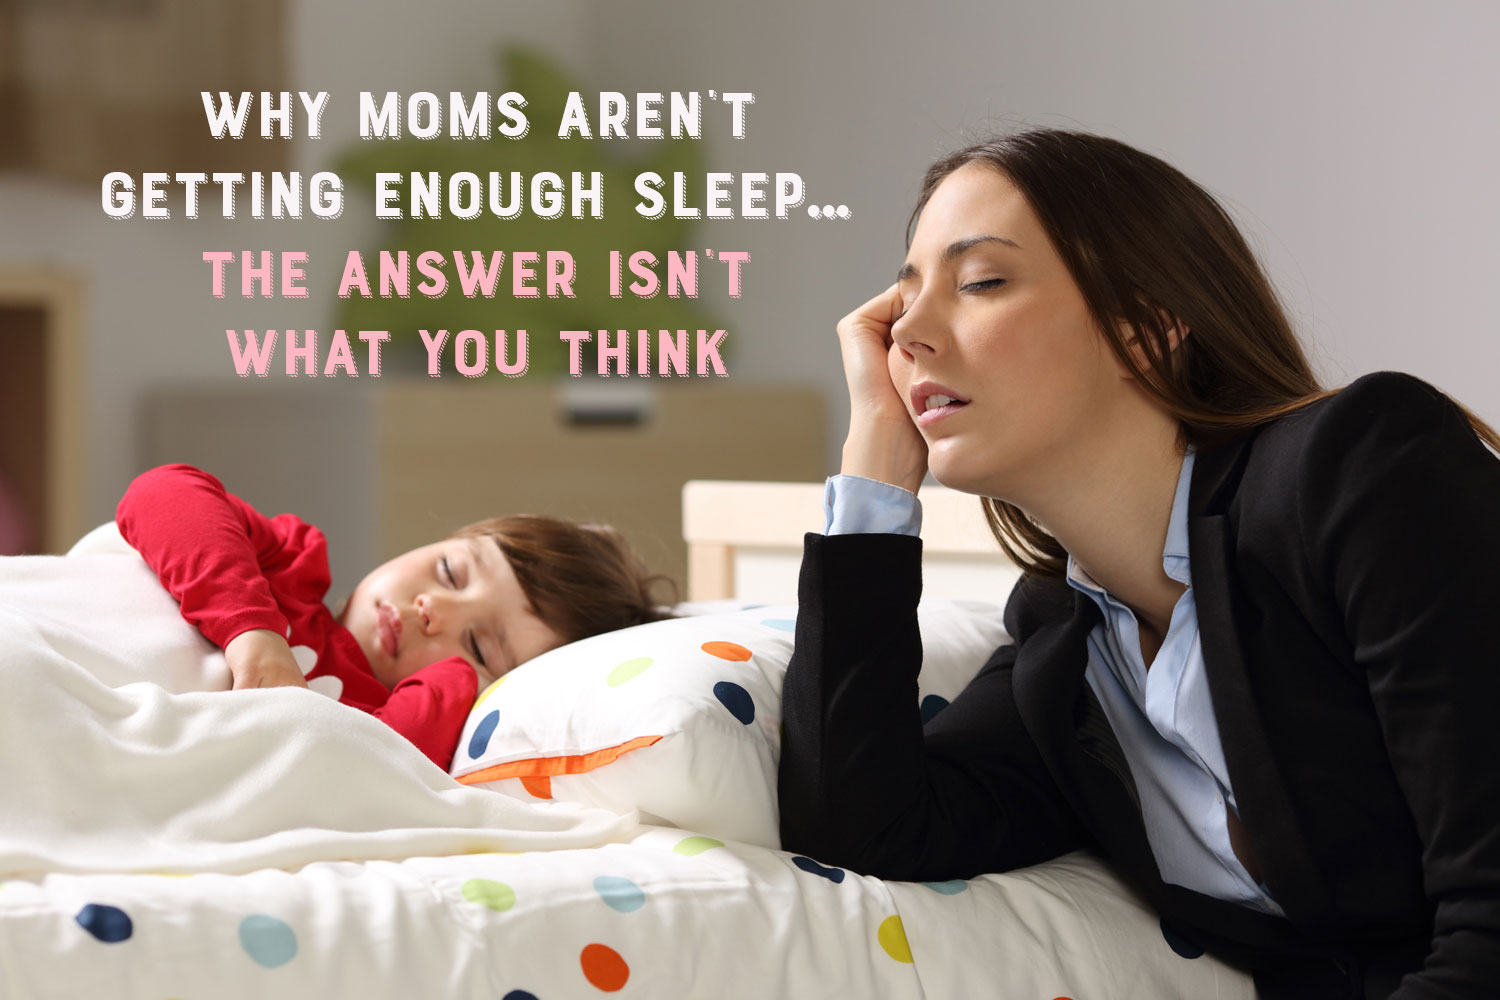 Why Moms Aren’t Getting Enough Sleep… The Answer Isn’t What You Think